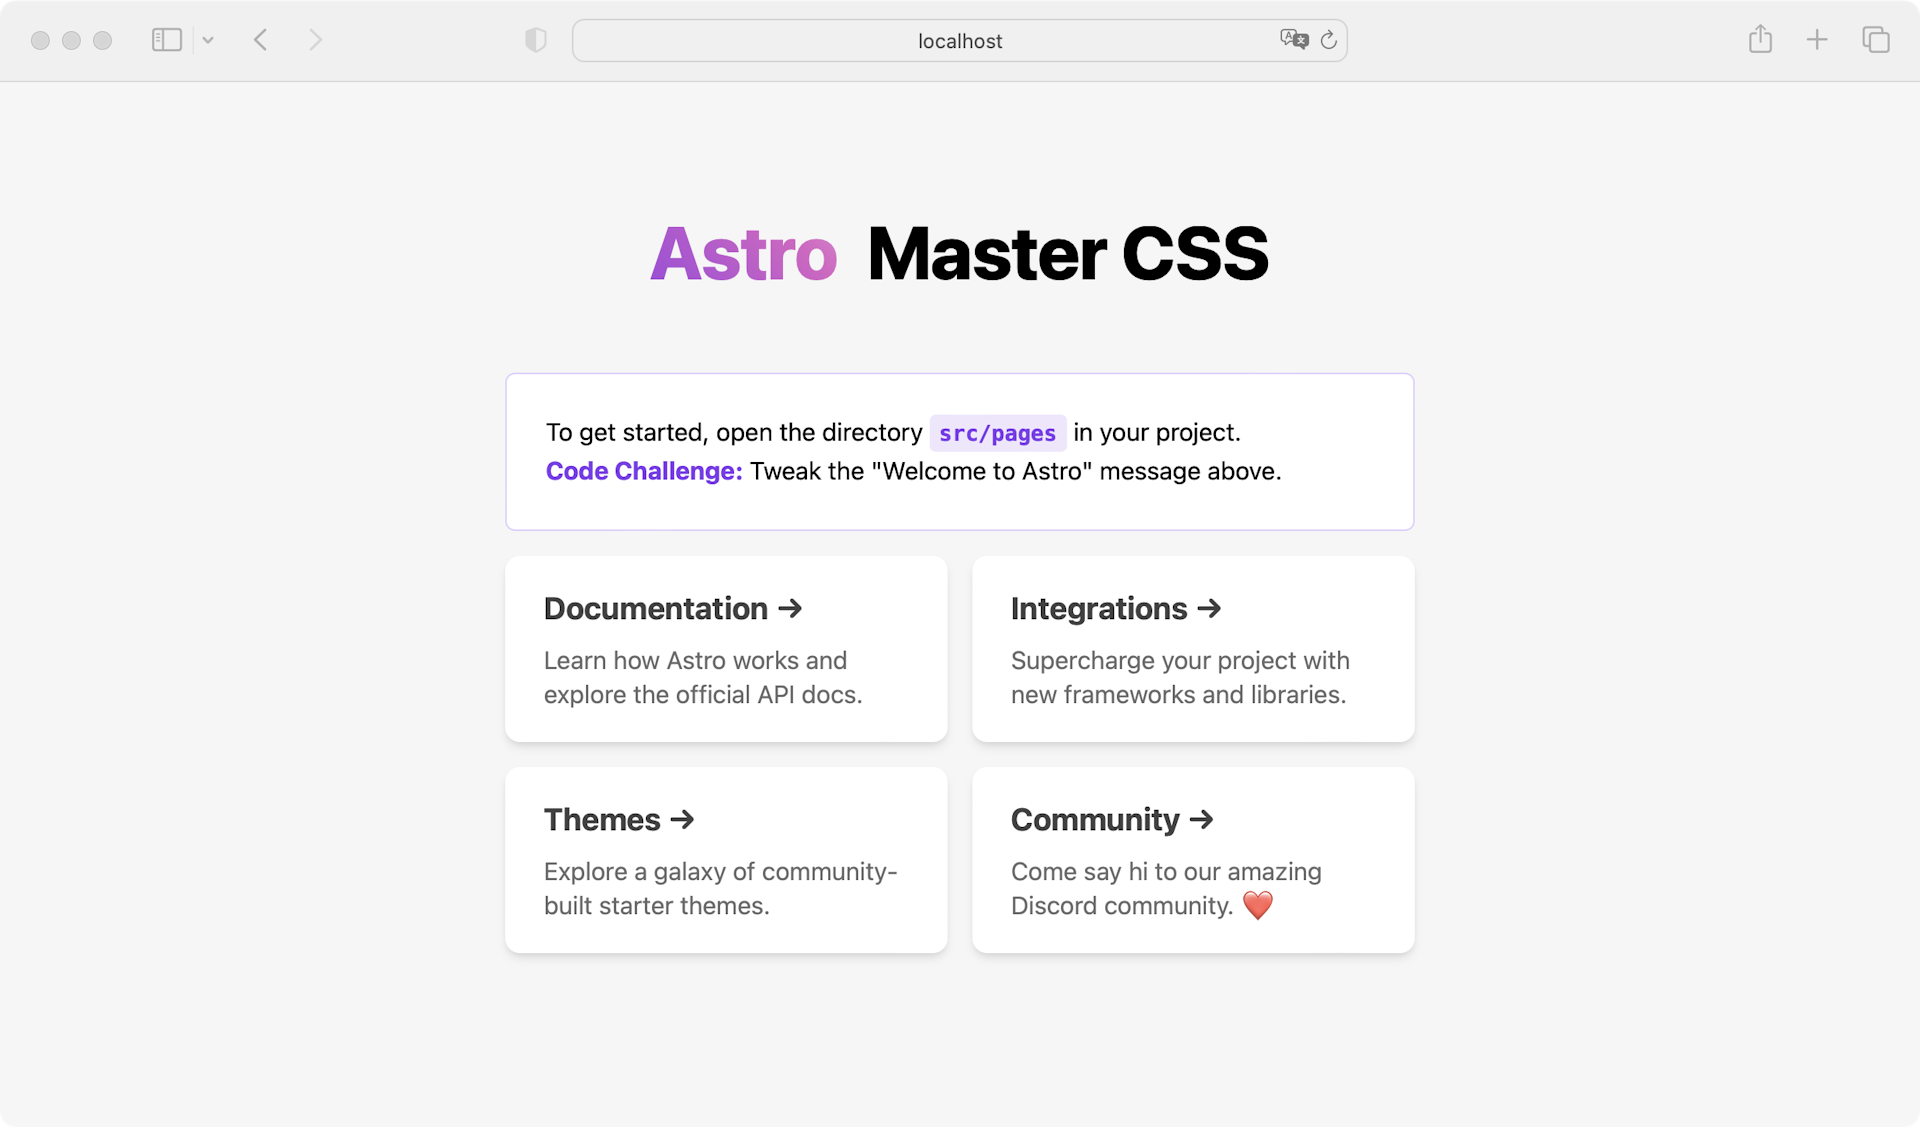 Astro and Master CSS